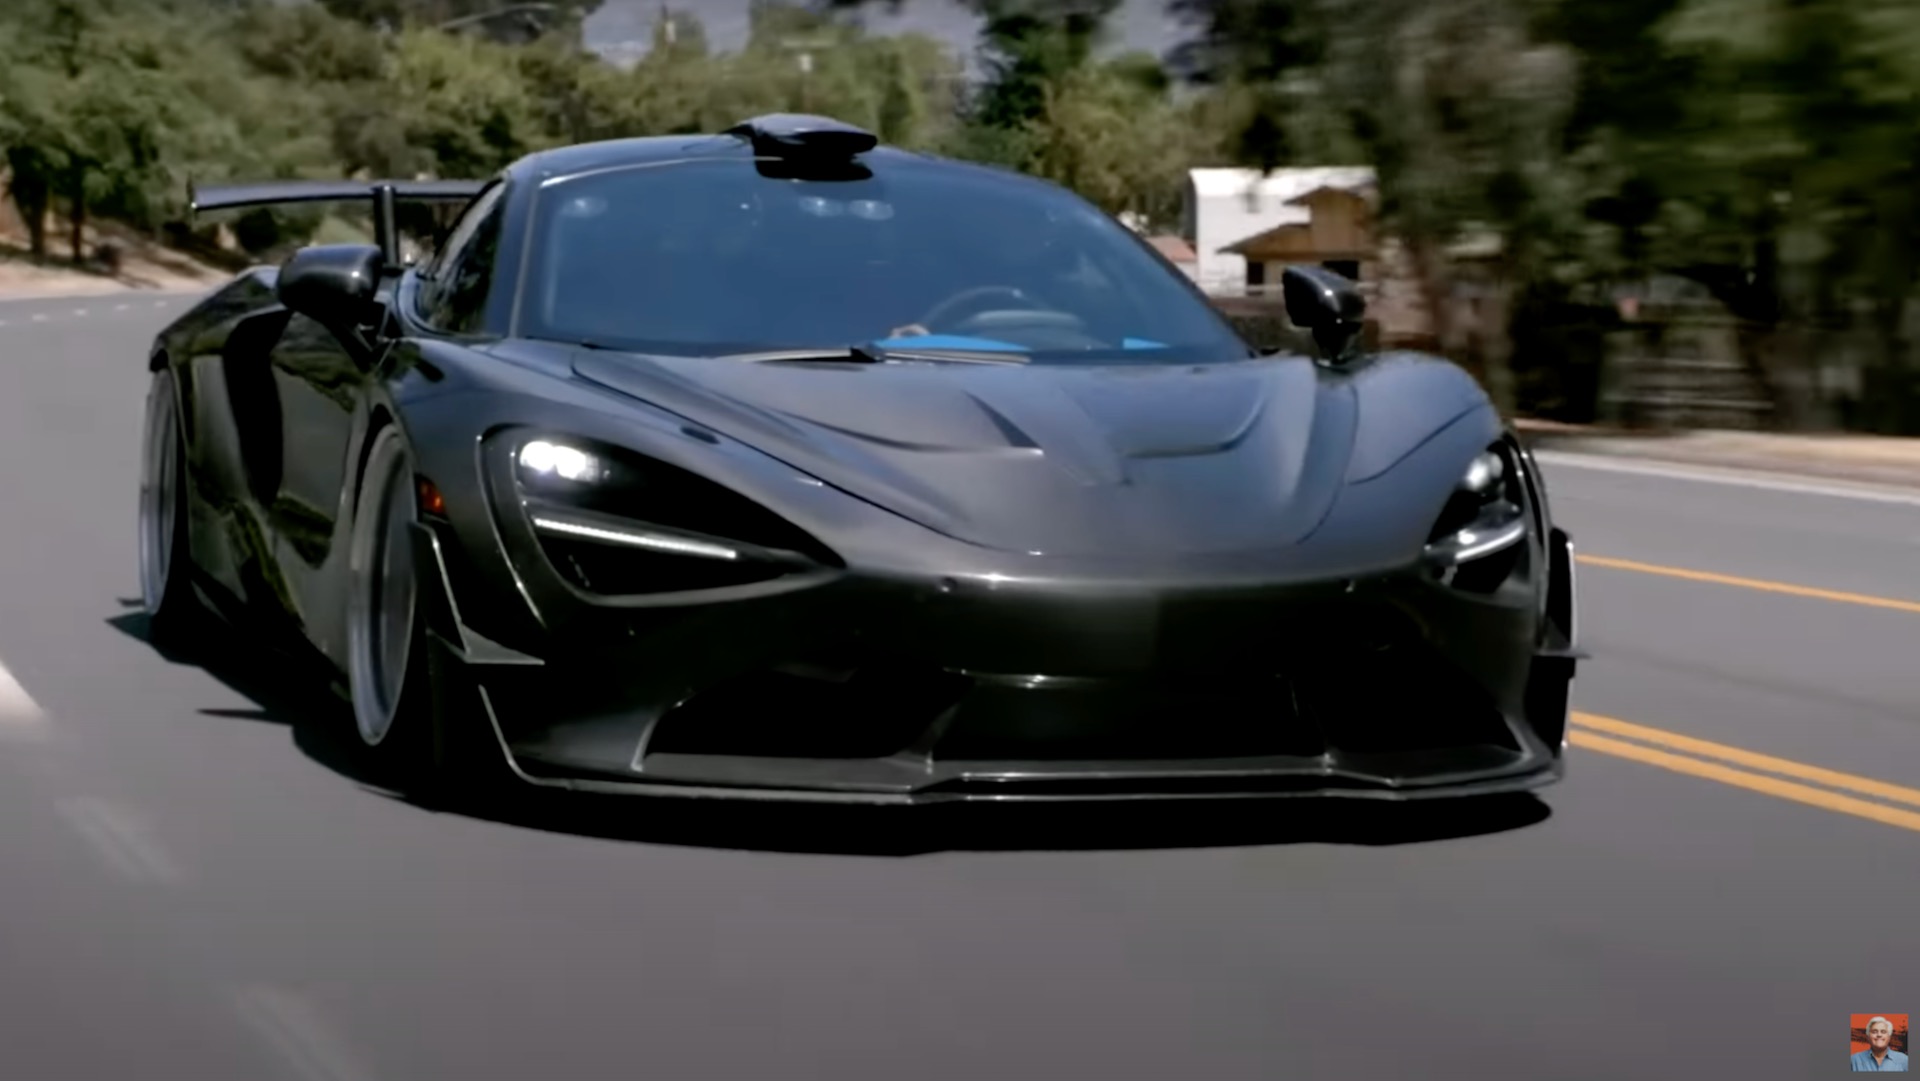 Jay Leno checks out a McLaren 720S modified by 1016 Industries Auto Recent